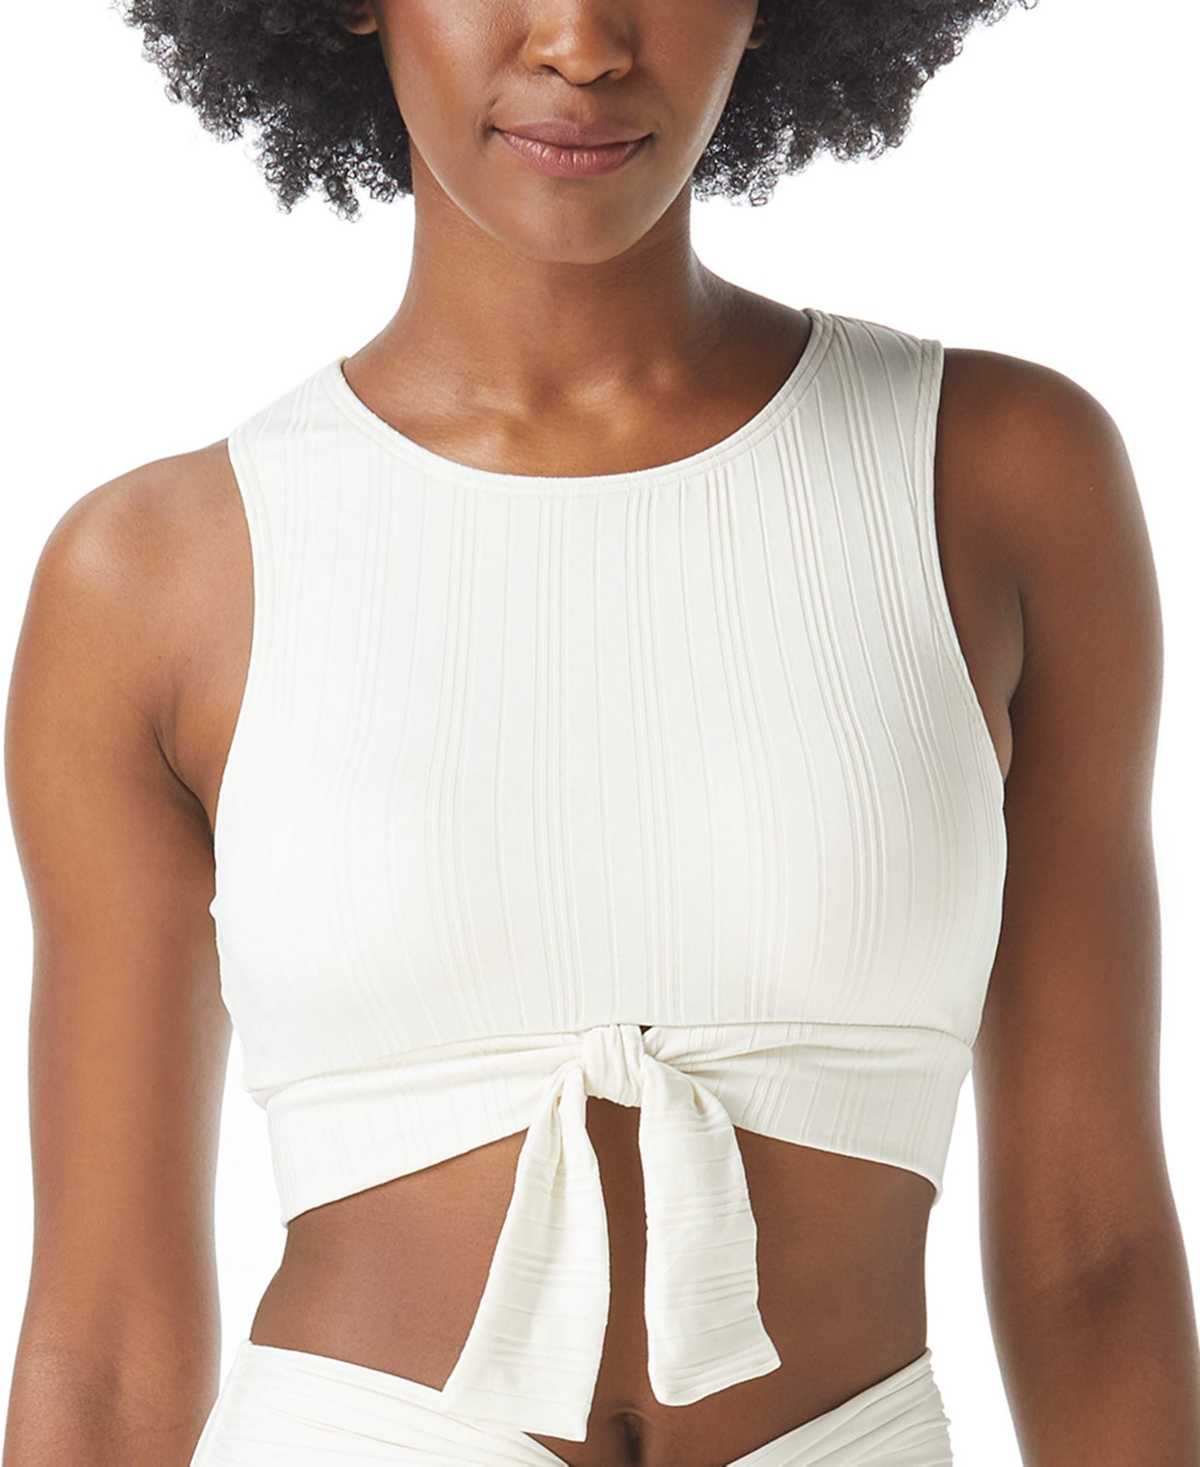 Vince Camuto Ribbed Tie-Front Bikini Top Women's Swimsuit